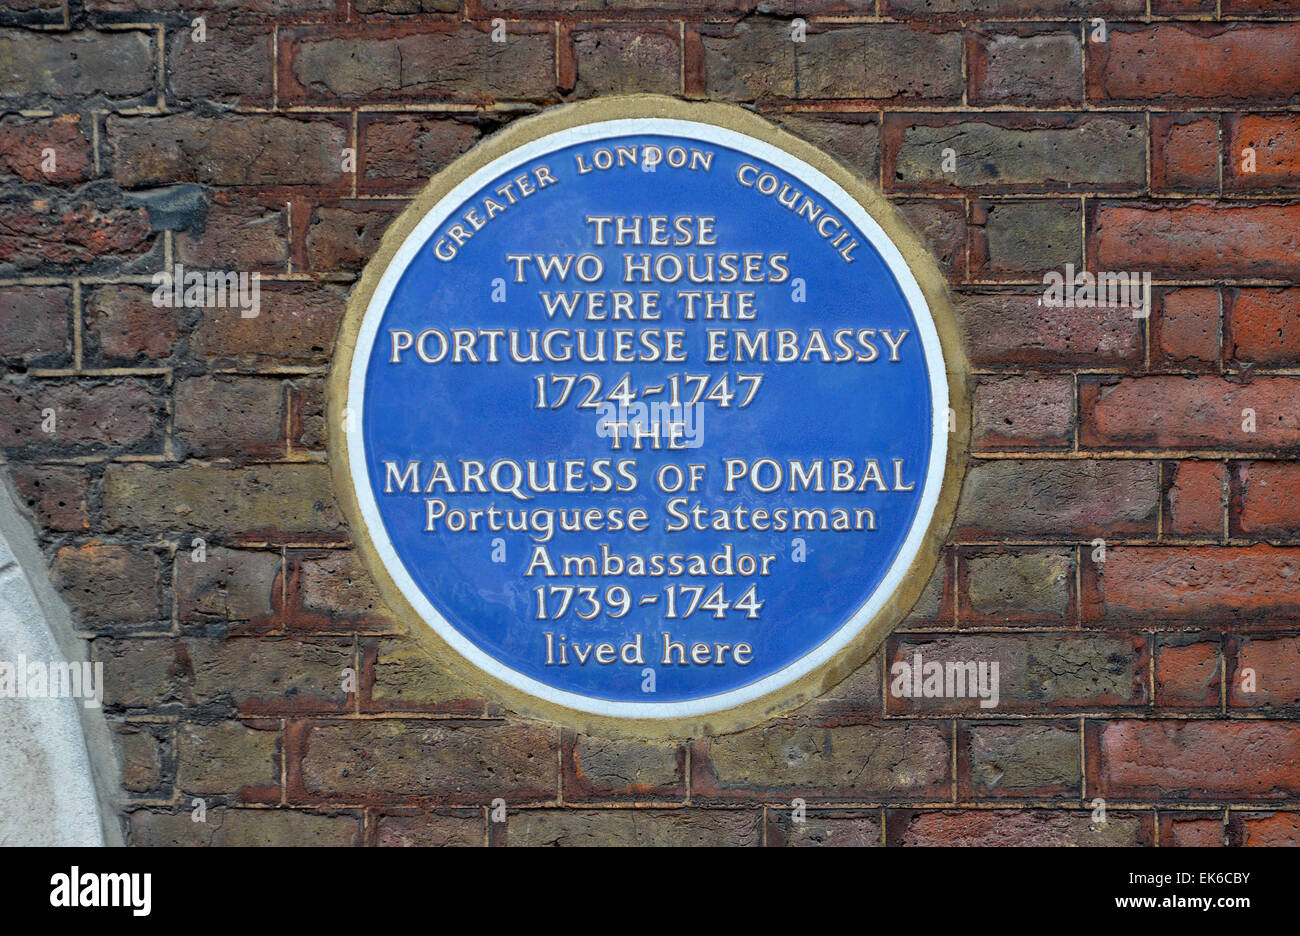 London, England, UK. Commemorative Blue Plaque: 'THESE TWO HOUSES WERE THE PORTUGUESE EMBASSY 1724-1747 THE MARQUESS OF POMBAL P Stock Photo